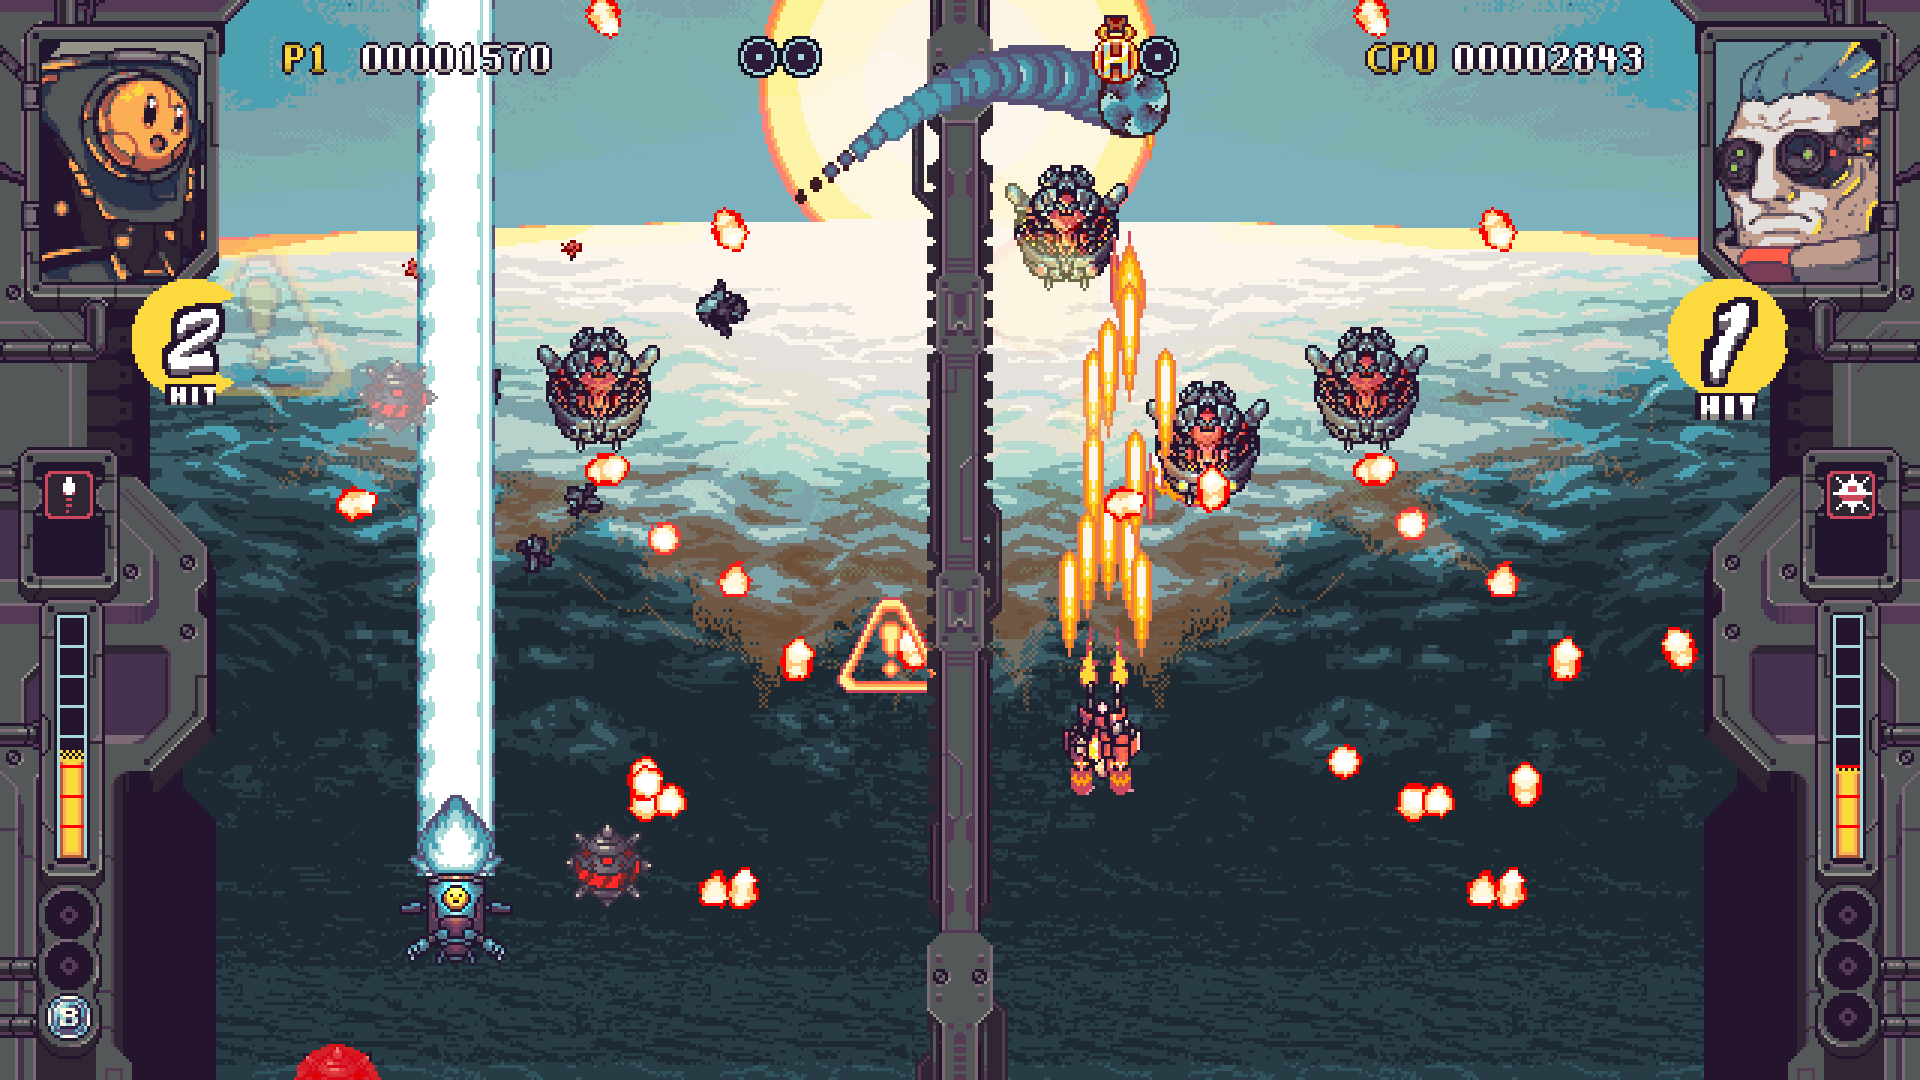 Rival Megagun brings classic shmup action to the Switch